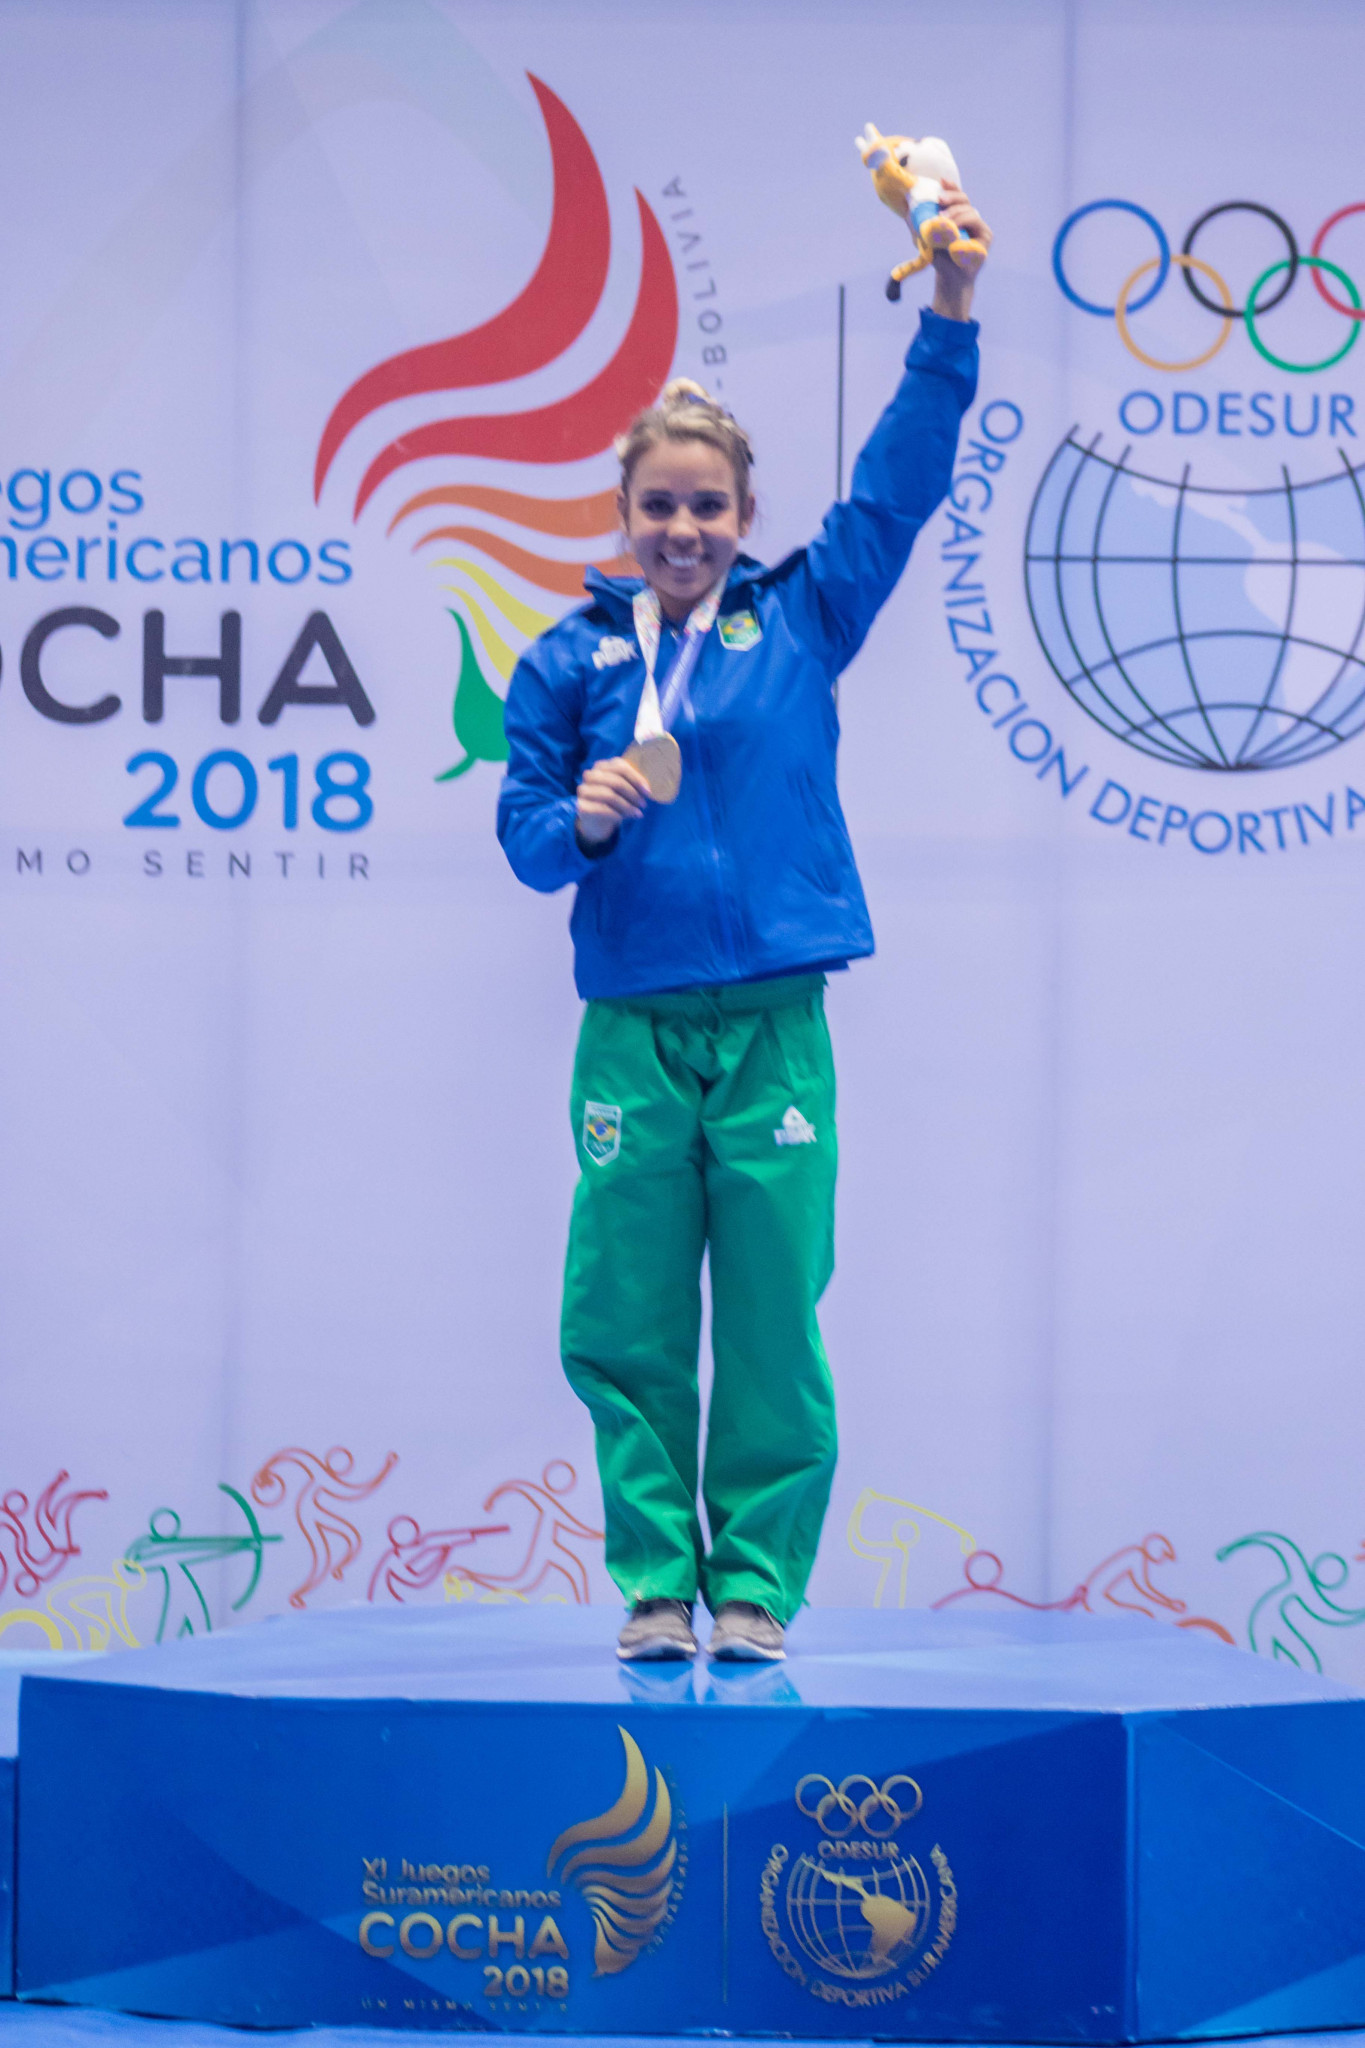 Camilla Lopes Gomes helped Brazil retain their spot at the top of the medals table ©South American Games 2018